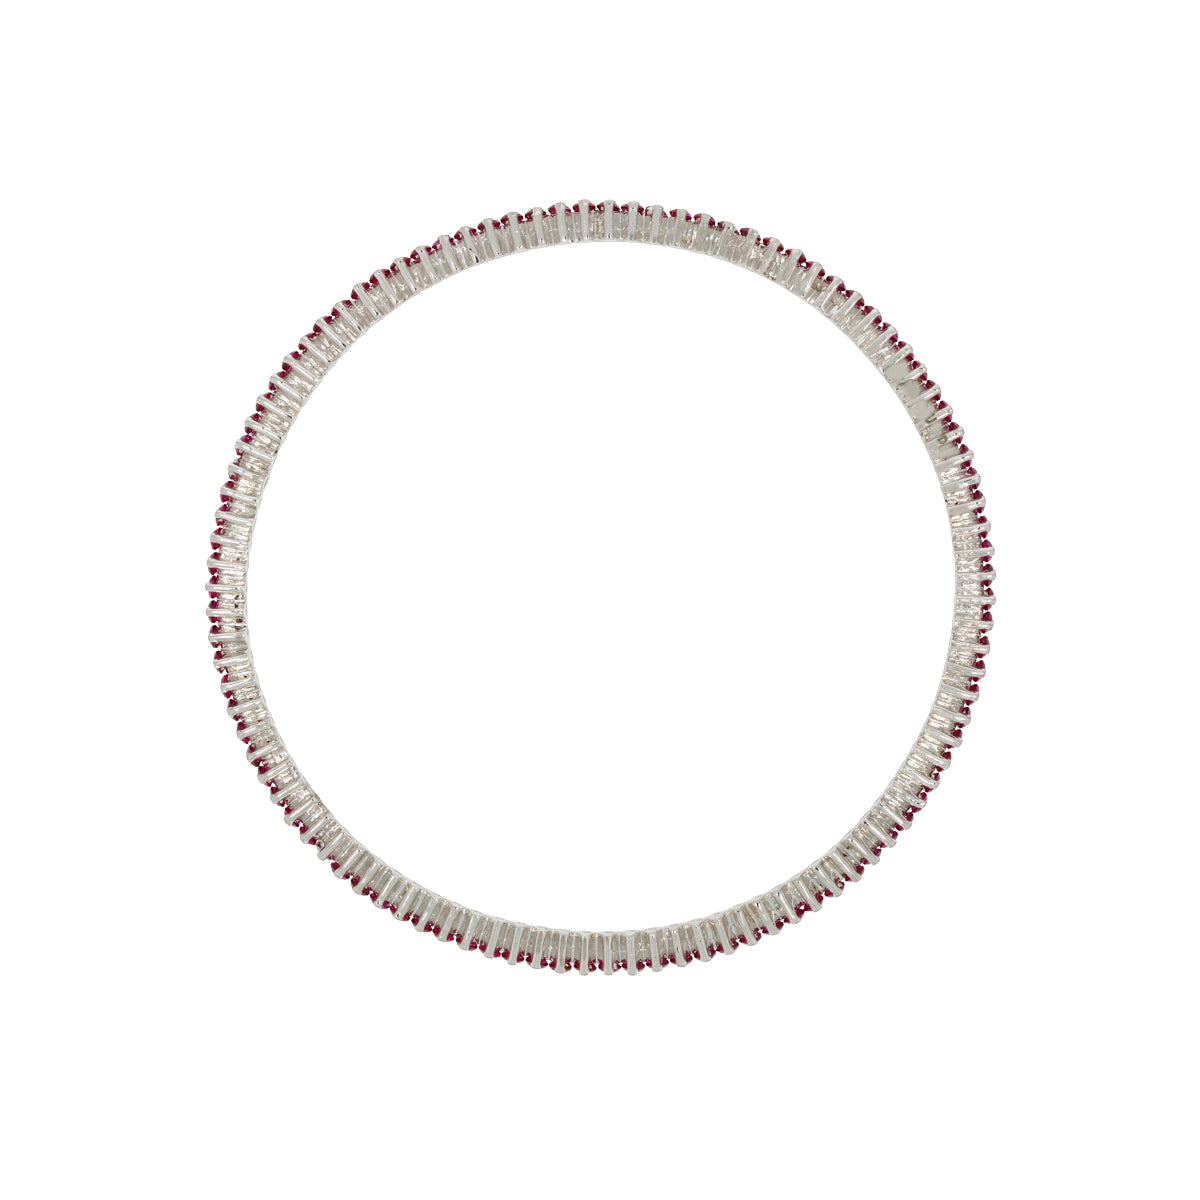 The Blossom Pink Bangles